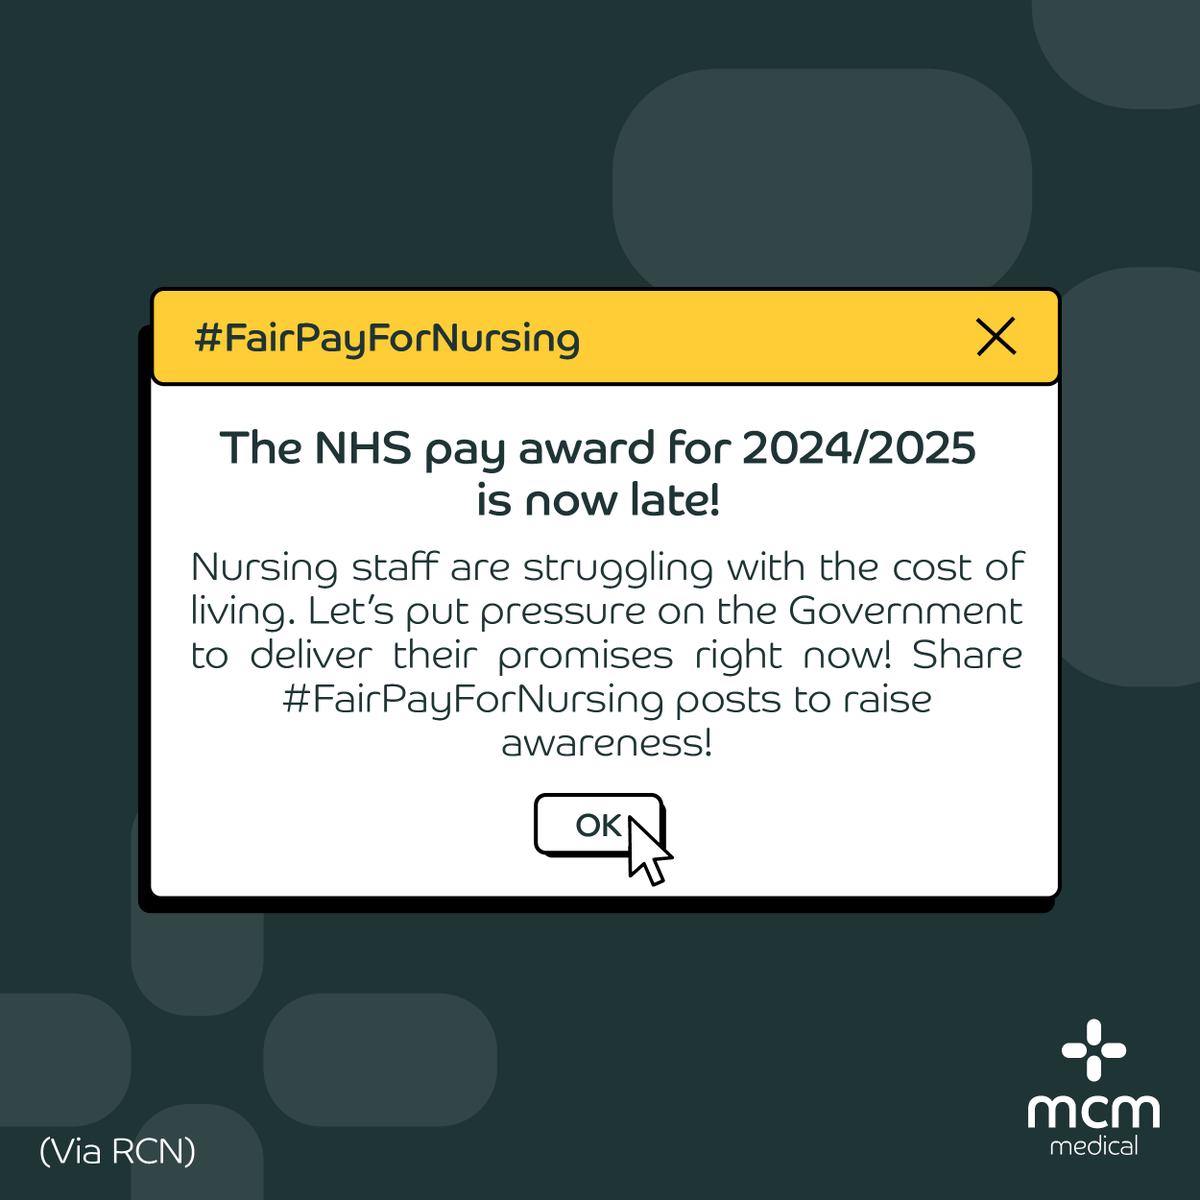 #Nurses are struggling with the cost of living.

The Government is late providing the NHS pay award for 2024/2025! Nursing staff and patients deserve better.

Put pressure on the Government to finally deliver the pay reward by sharing #FairPayForNursing posts on social media! 📣